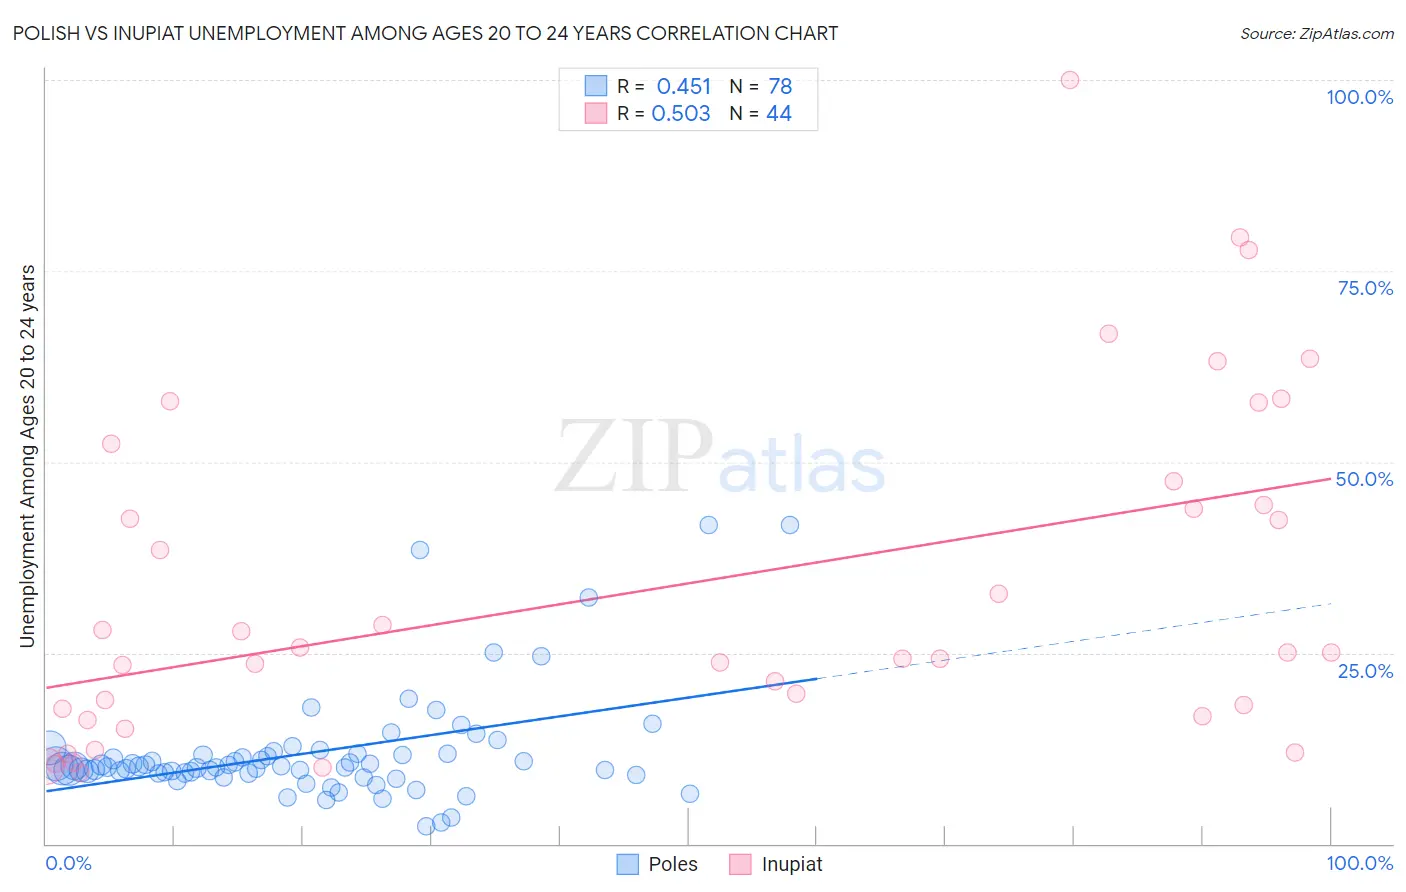 Polish vs Inupiat Unemployment Among Ages 20 to 24 years